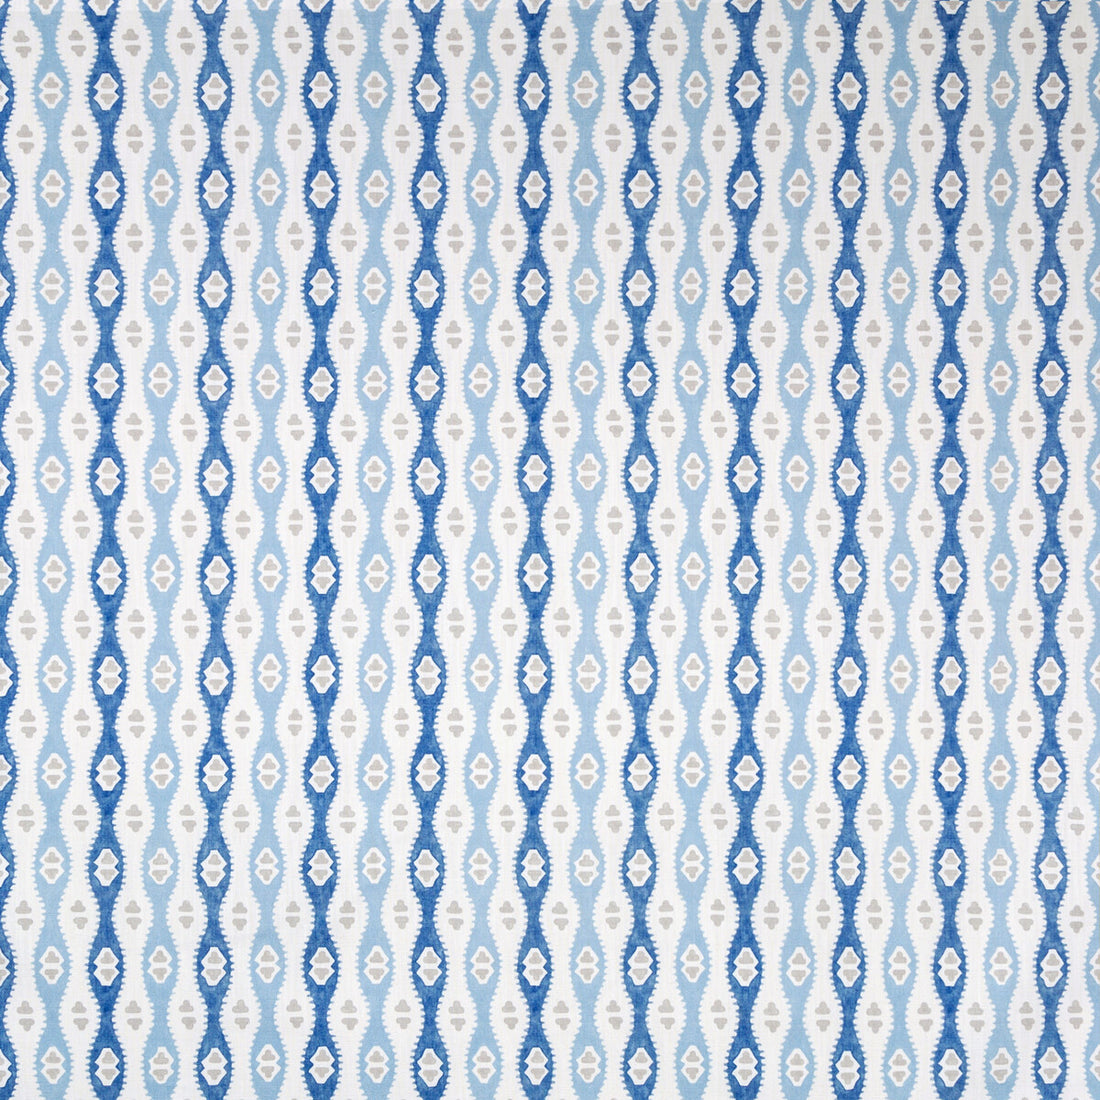 Elba Print fabric in capri color - pattern 2020187.155.0 - by Lee Jofa in the Avondale collection